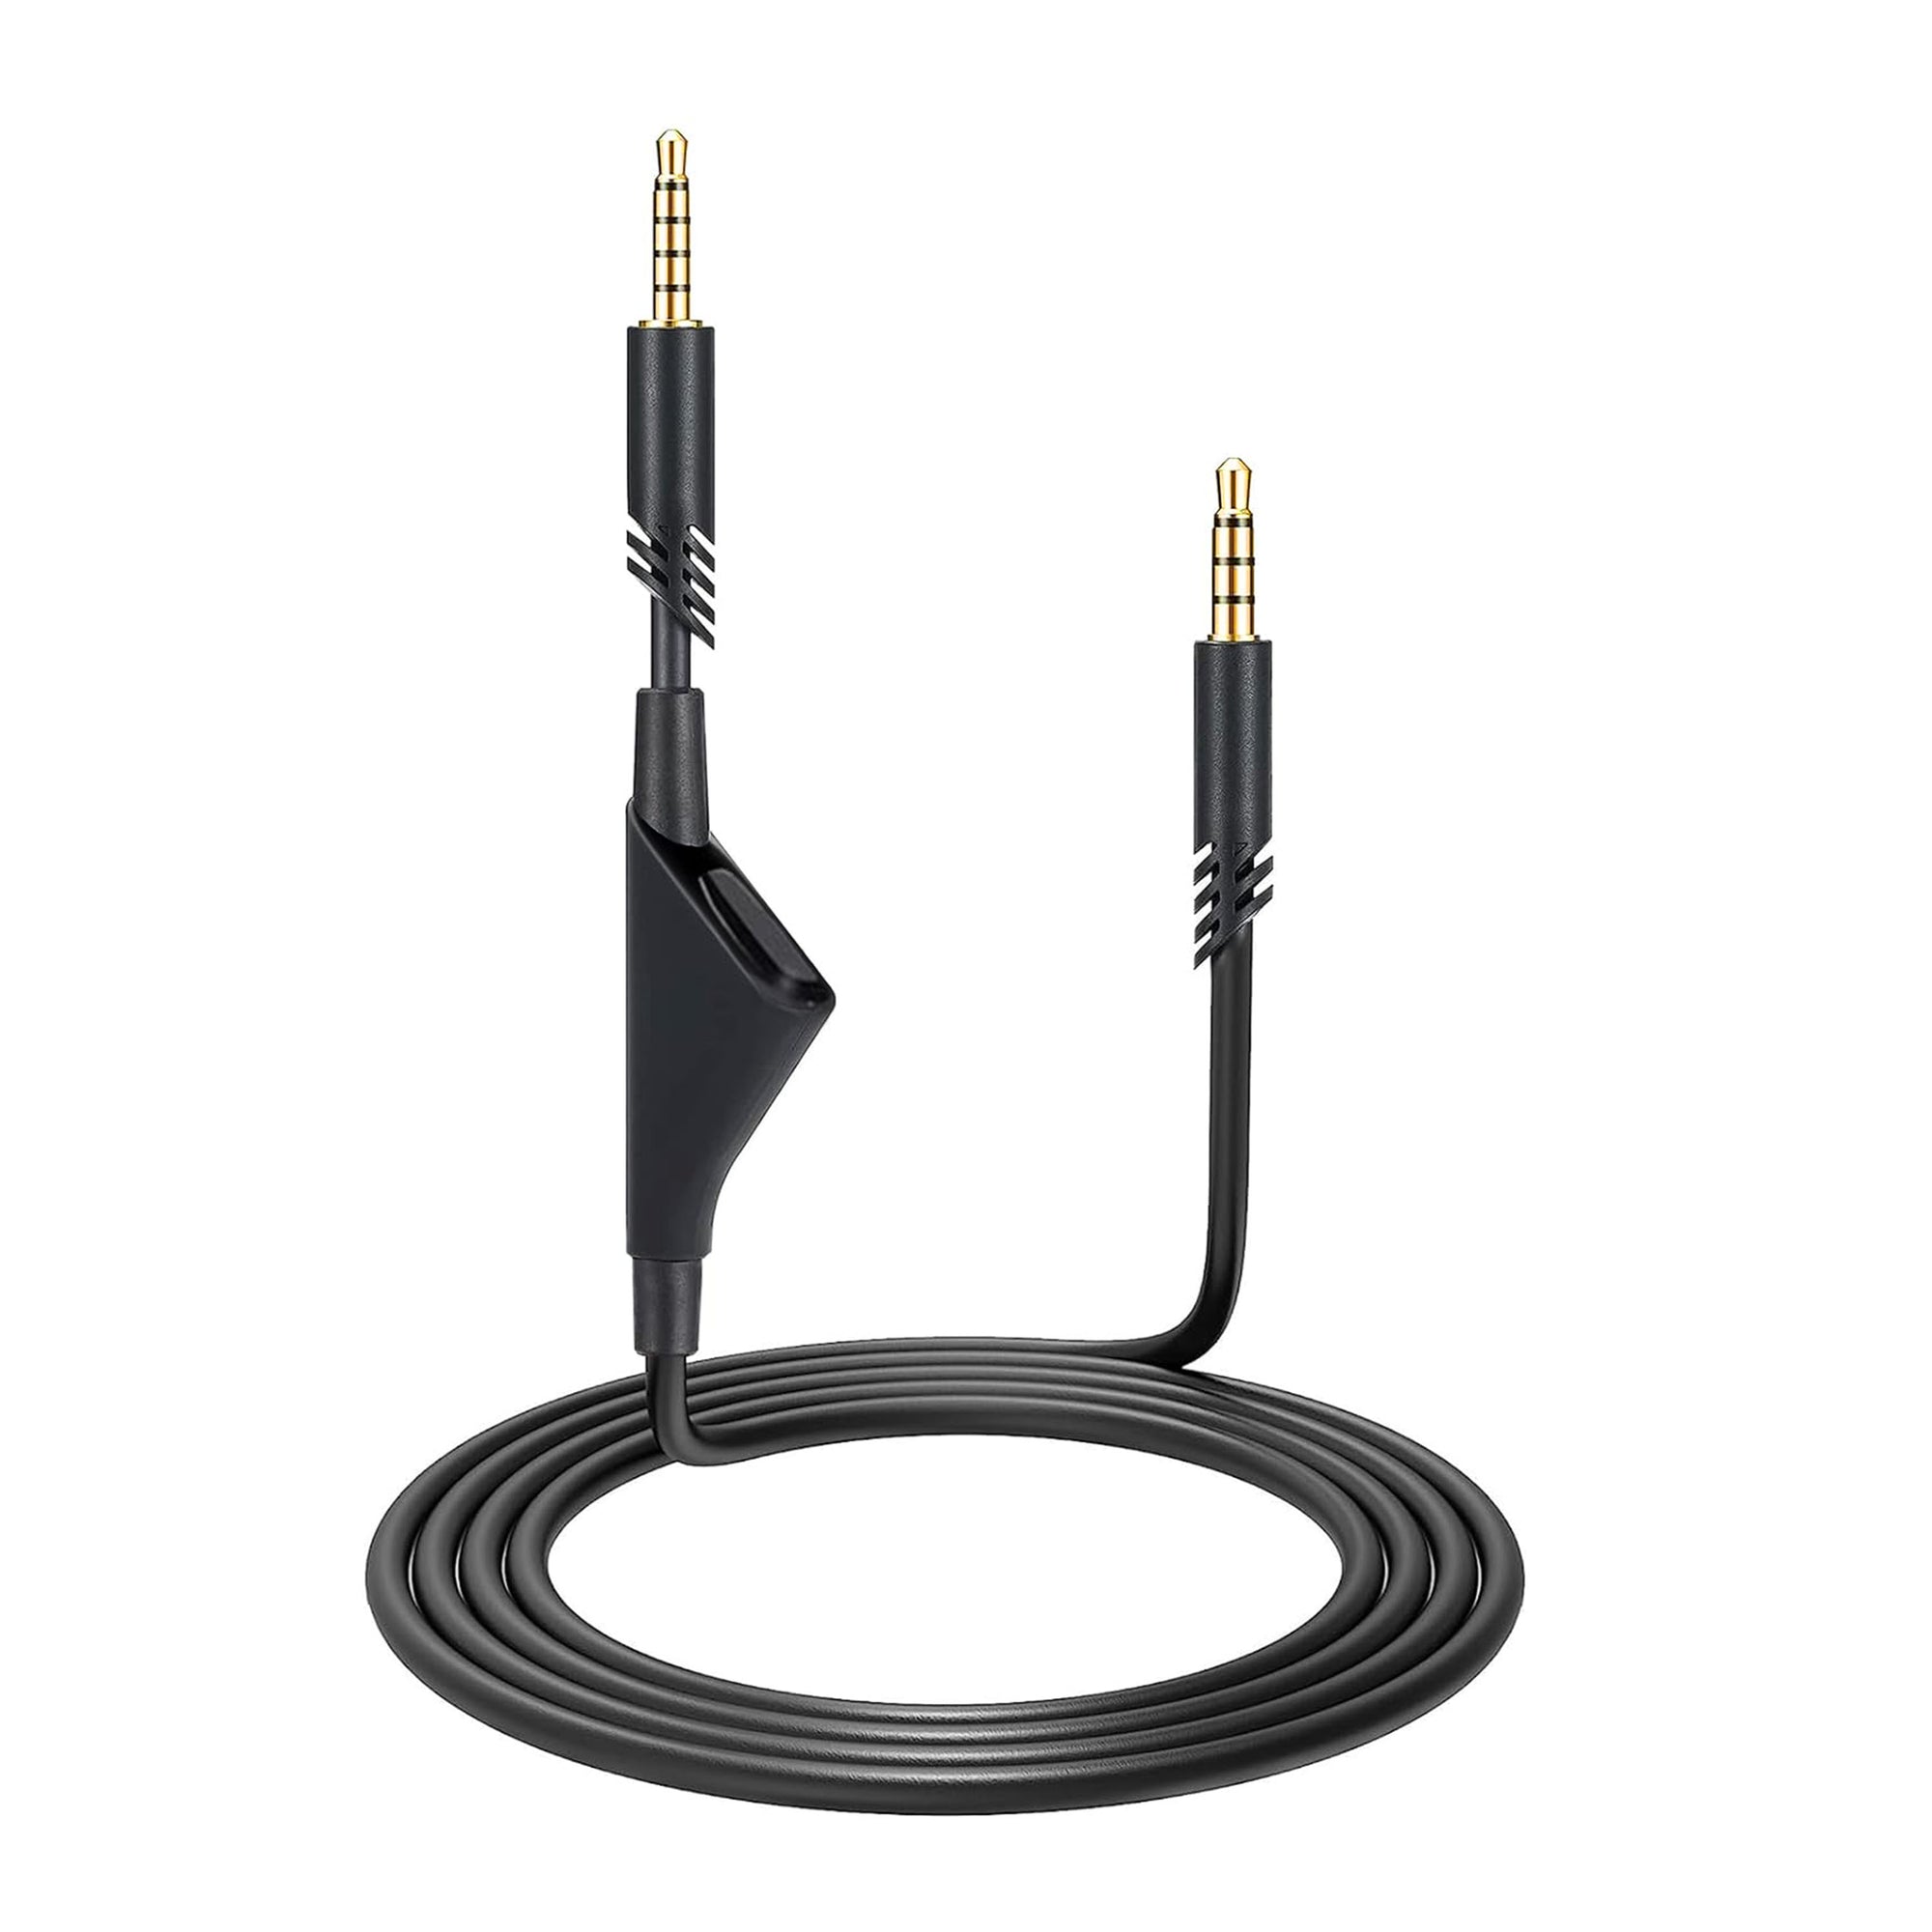 Replacement Audio Cable for Logitech Astro A10, A30, A40,A50 Headphones with in-line Mute Control - 2M / 78”